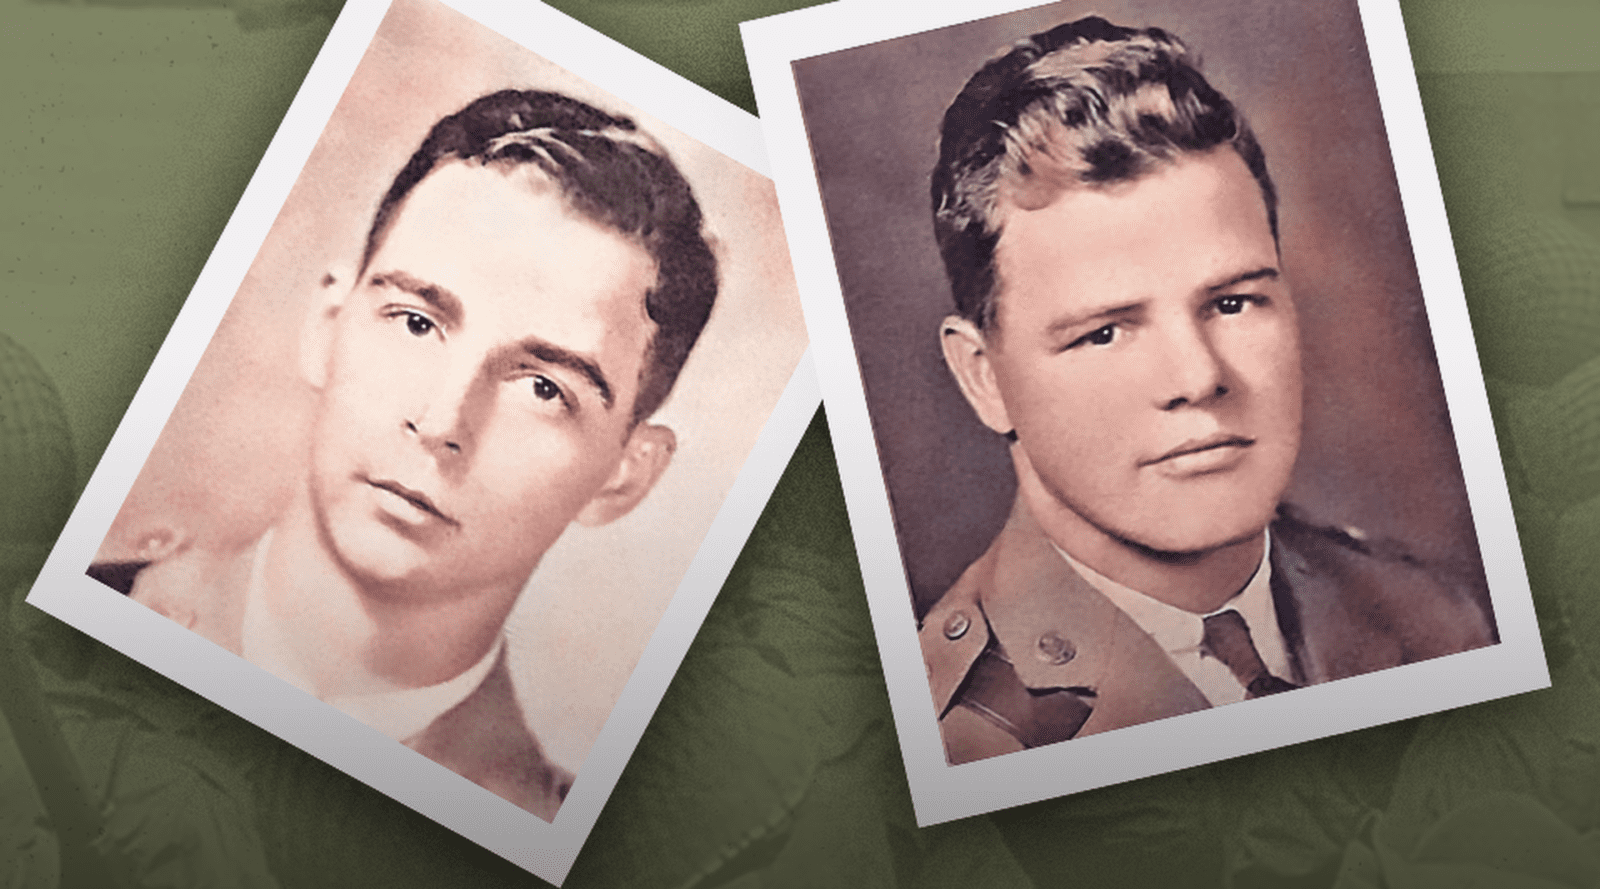 Two older military photos of two Clemson alumni, both are school photos and feature the men in their military uniforms.